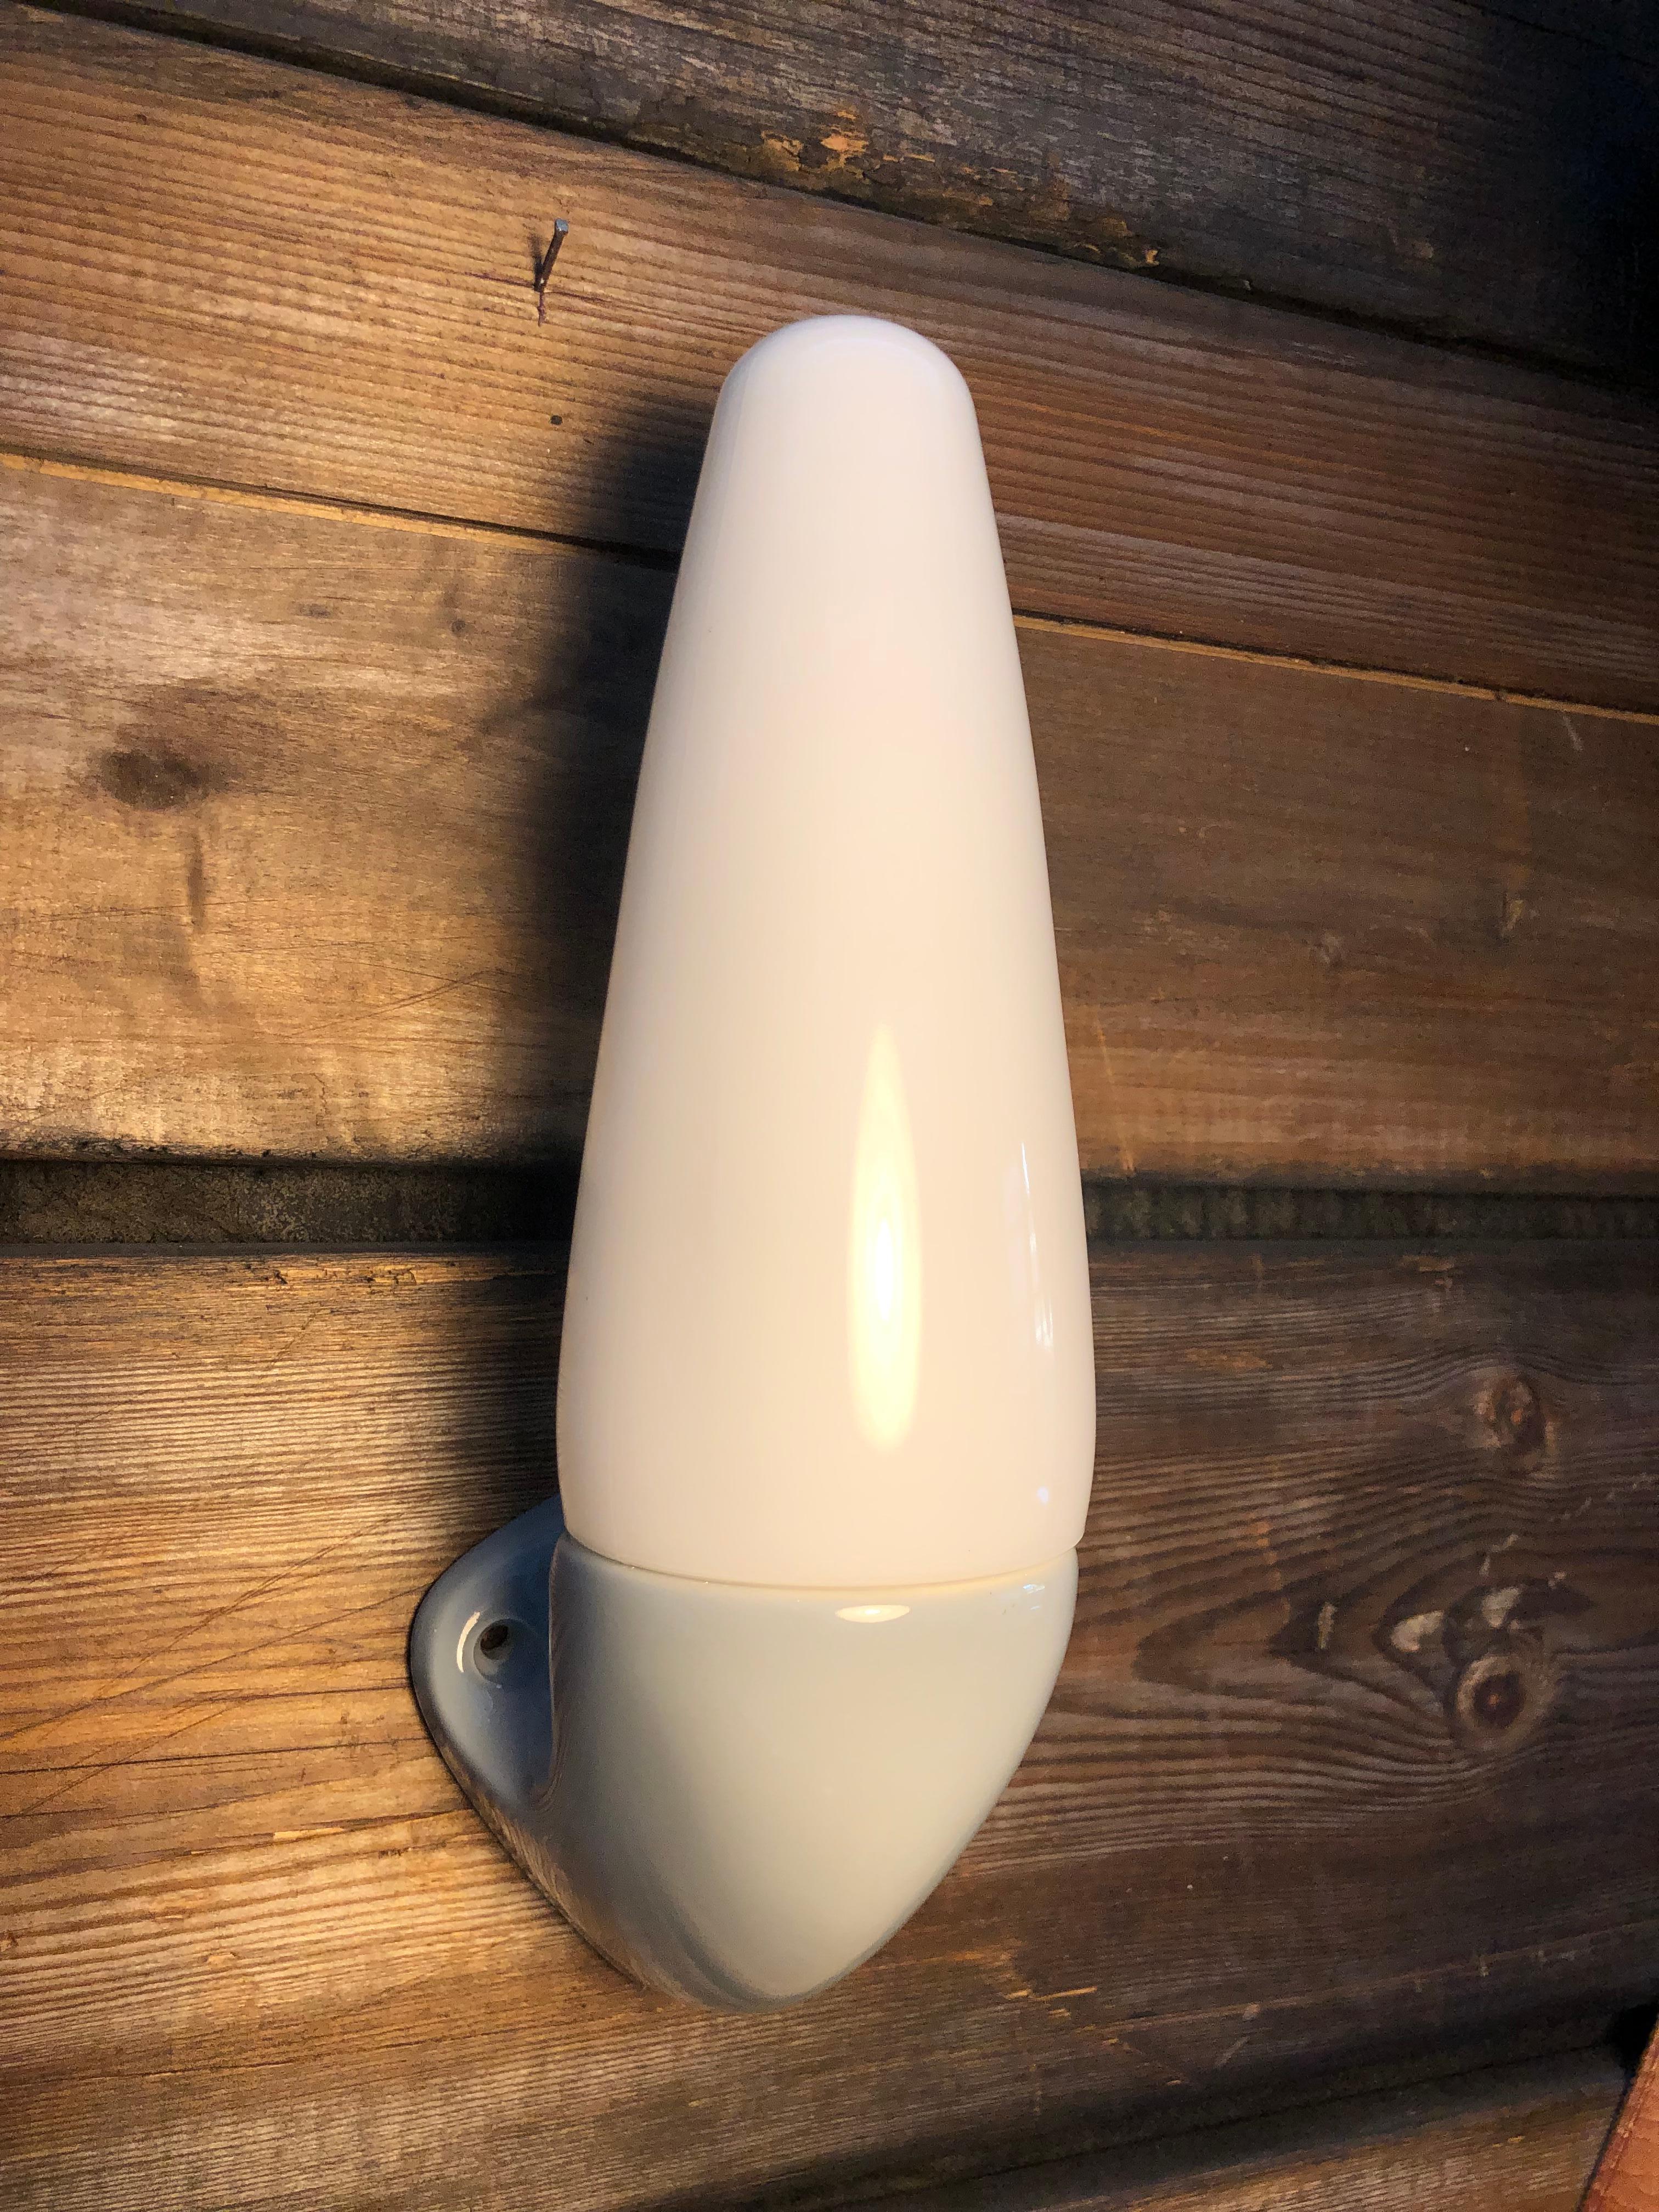 Swedish Vintage Ifö of Sweden Ceramic Bathroom Lamps with Opaline Shades from the 1960s For Sale